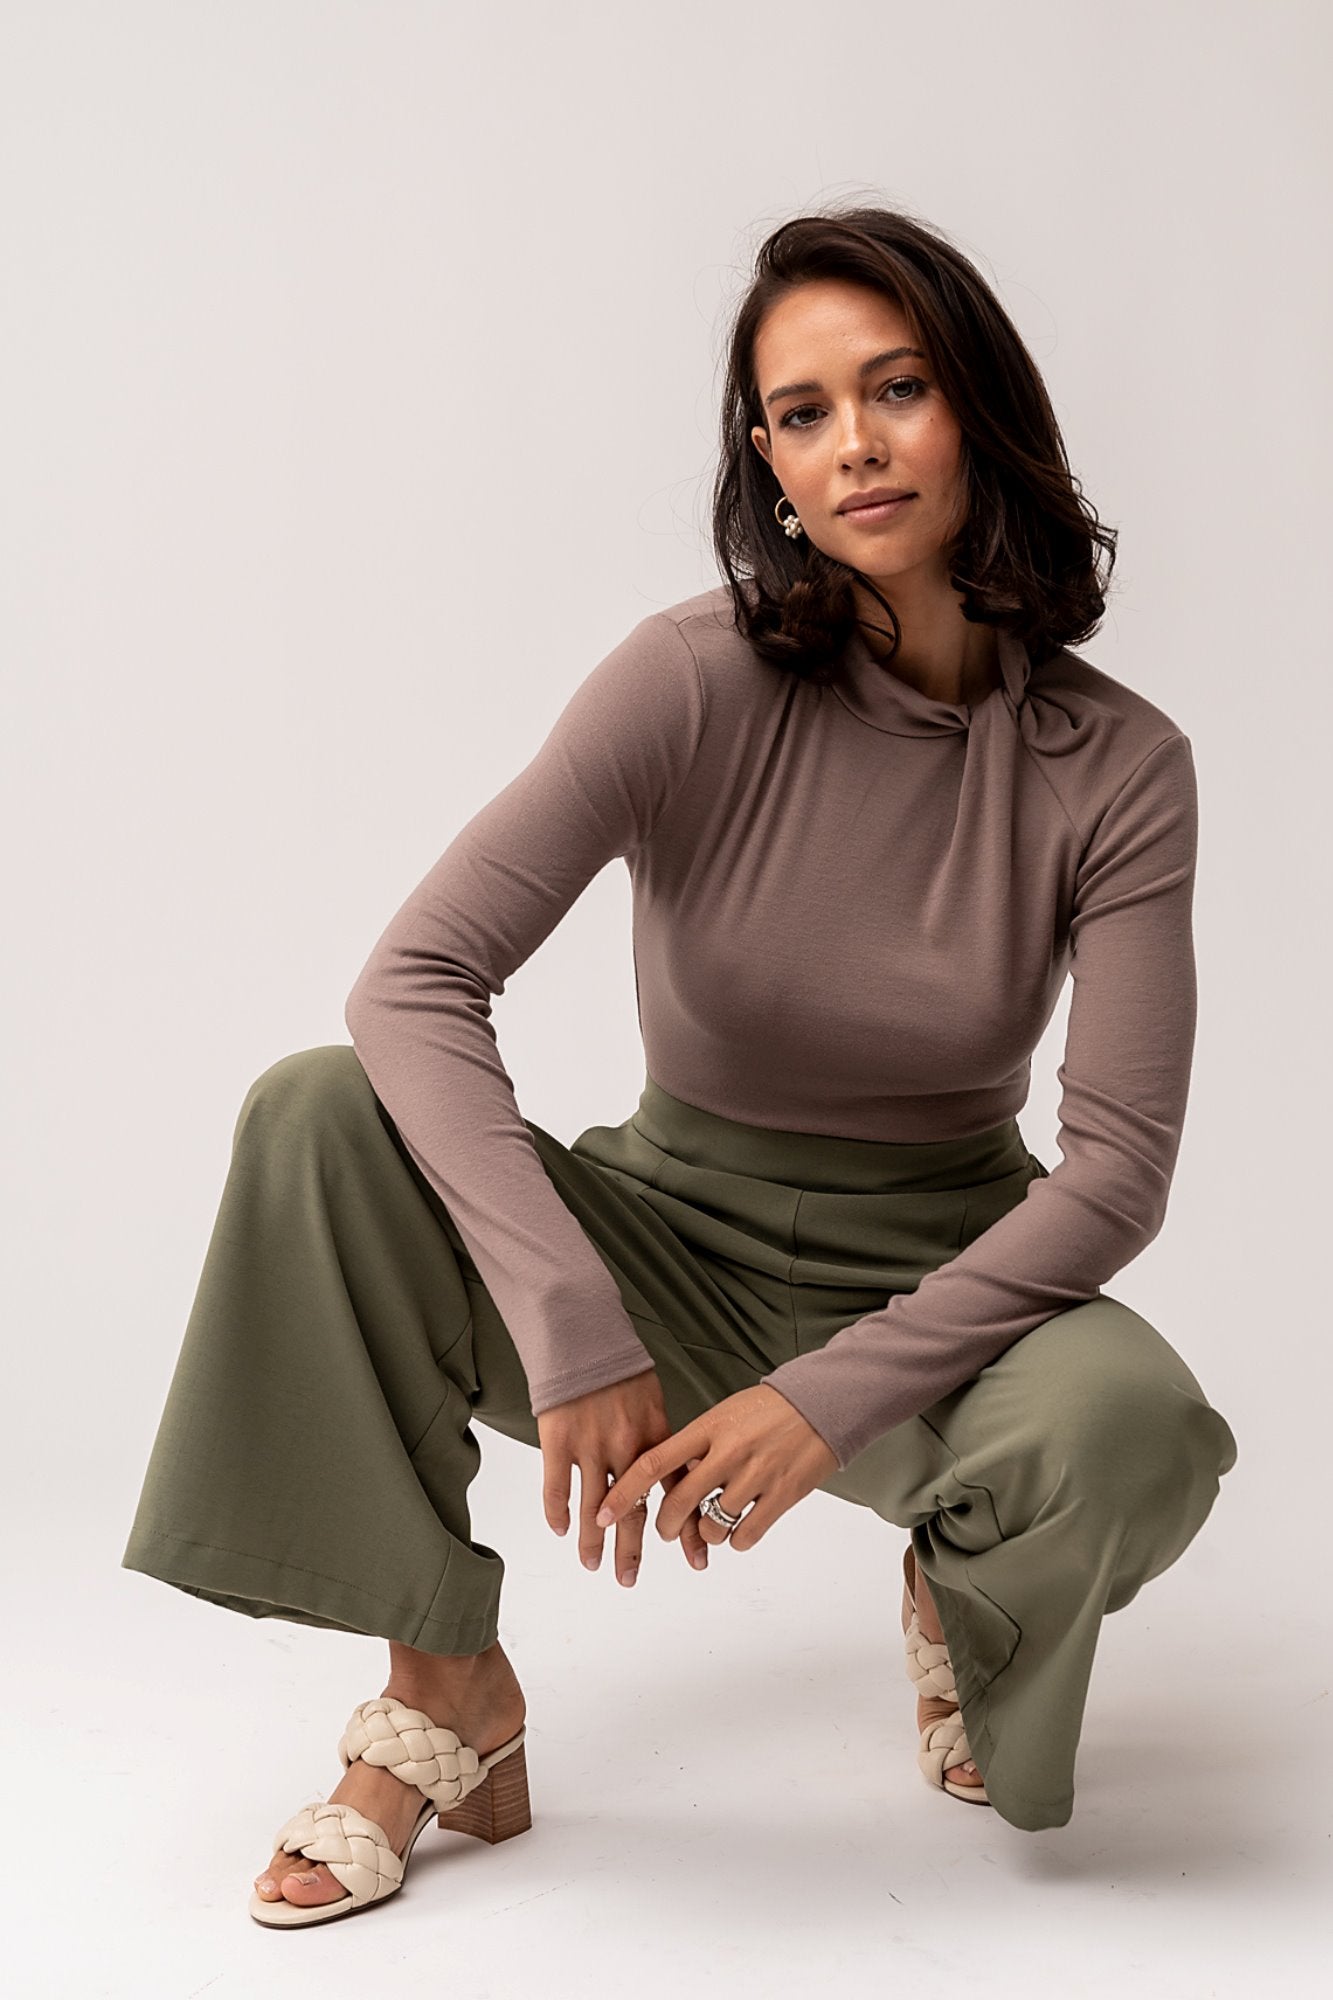 Jovie Pant in Olive Clothing Holley Girl 